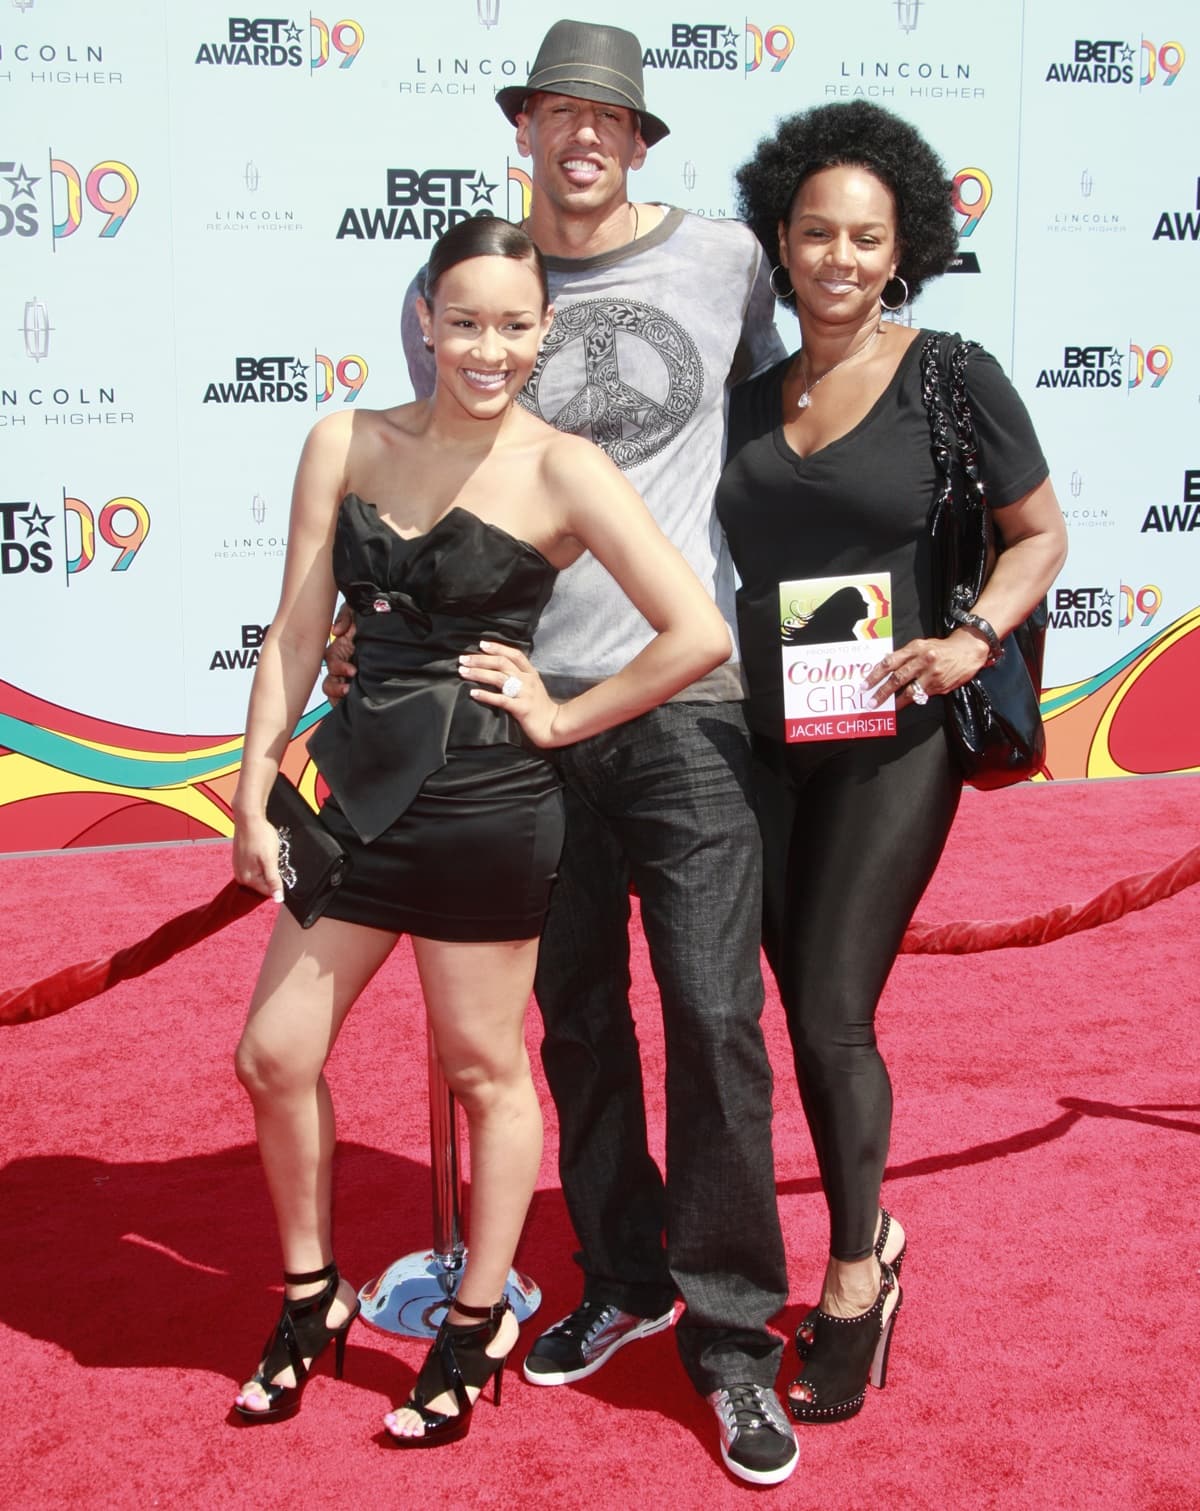 Doug Christie with his wife Jackie and their daughter Chantel at the 2009 BET Awards